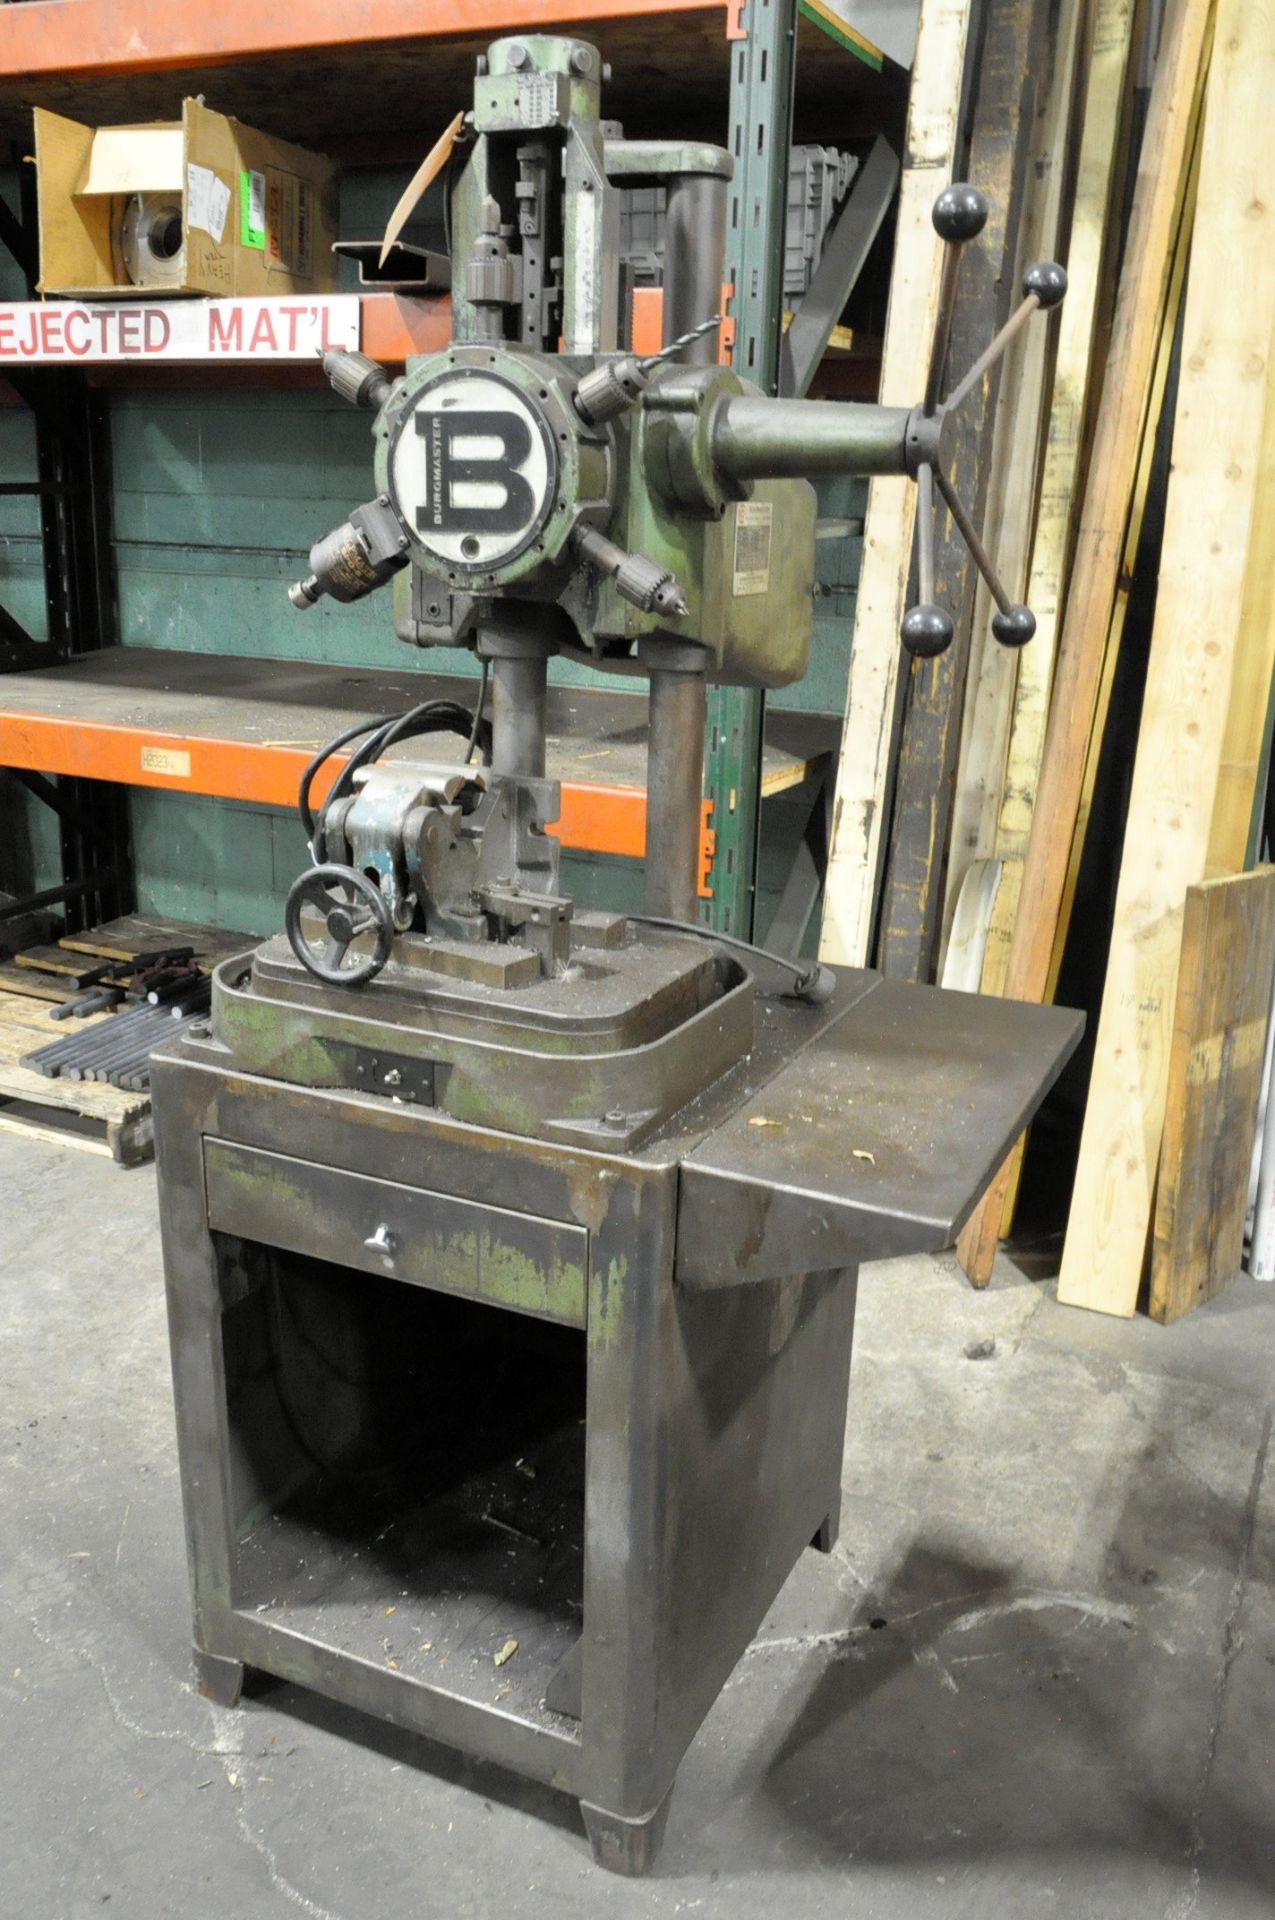 Burgmaster 6-Position Turret Drill, S/n 867, 1/3-HP, with Cabinet Base